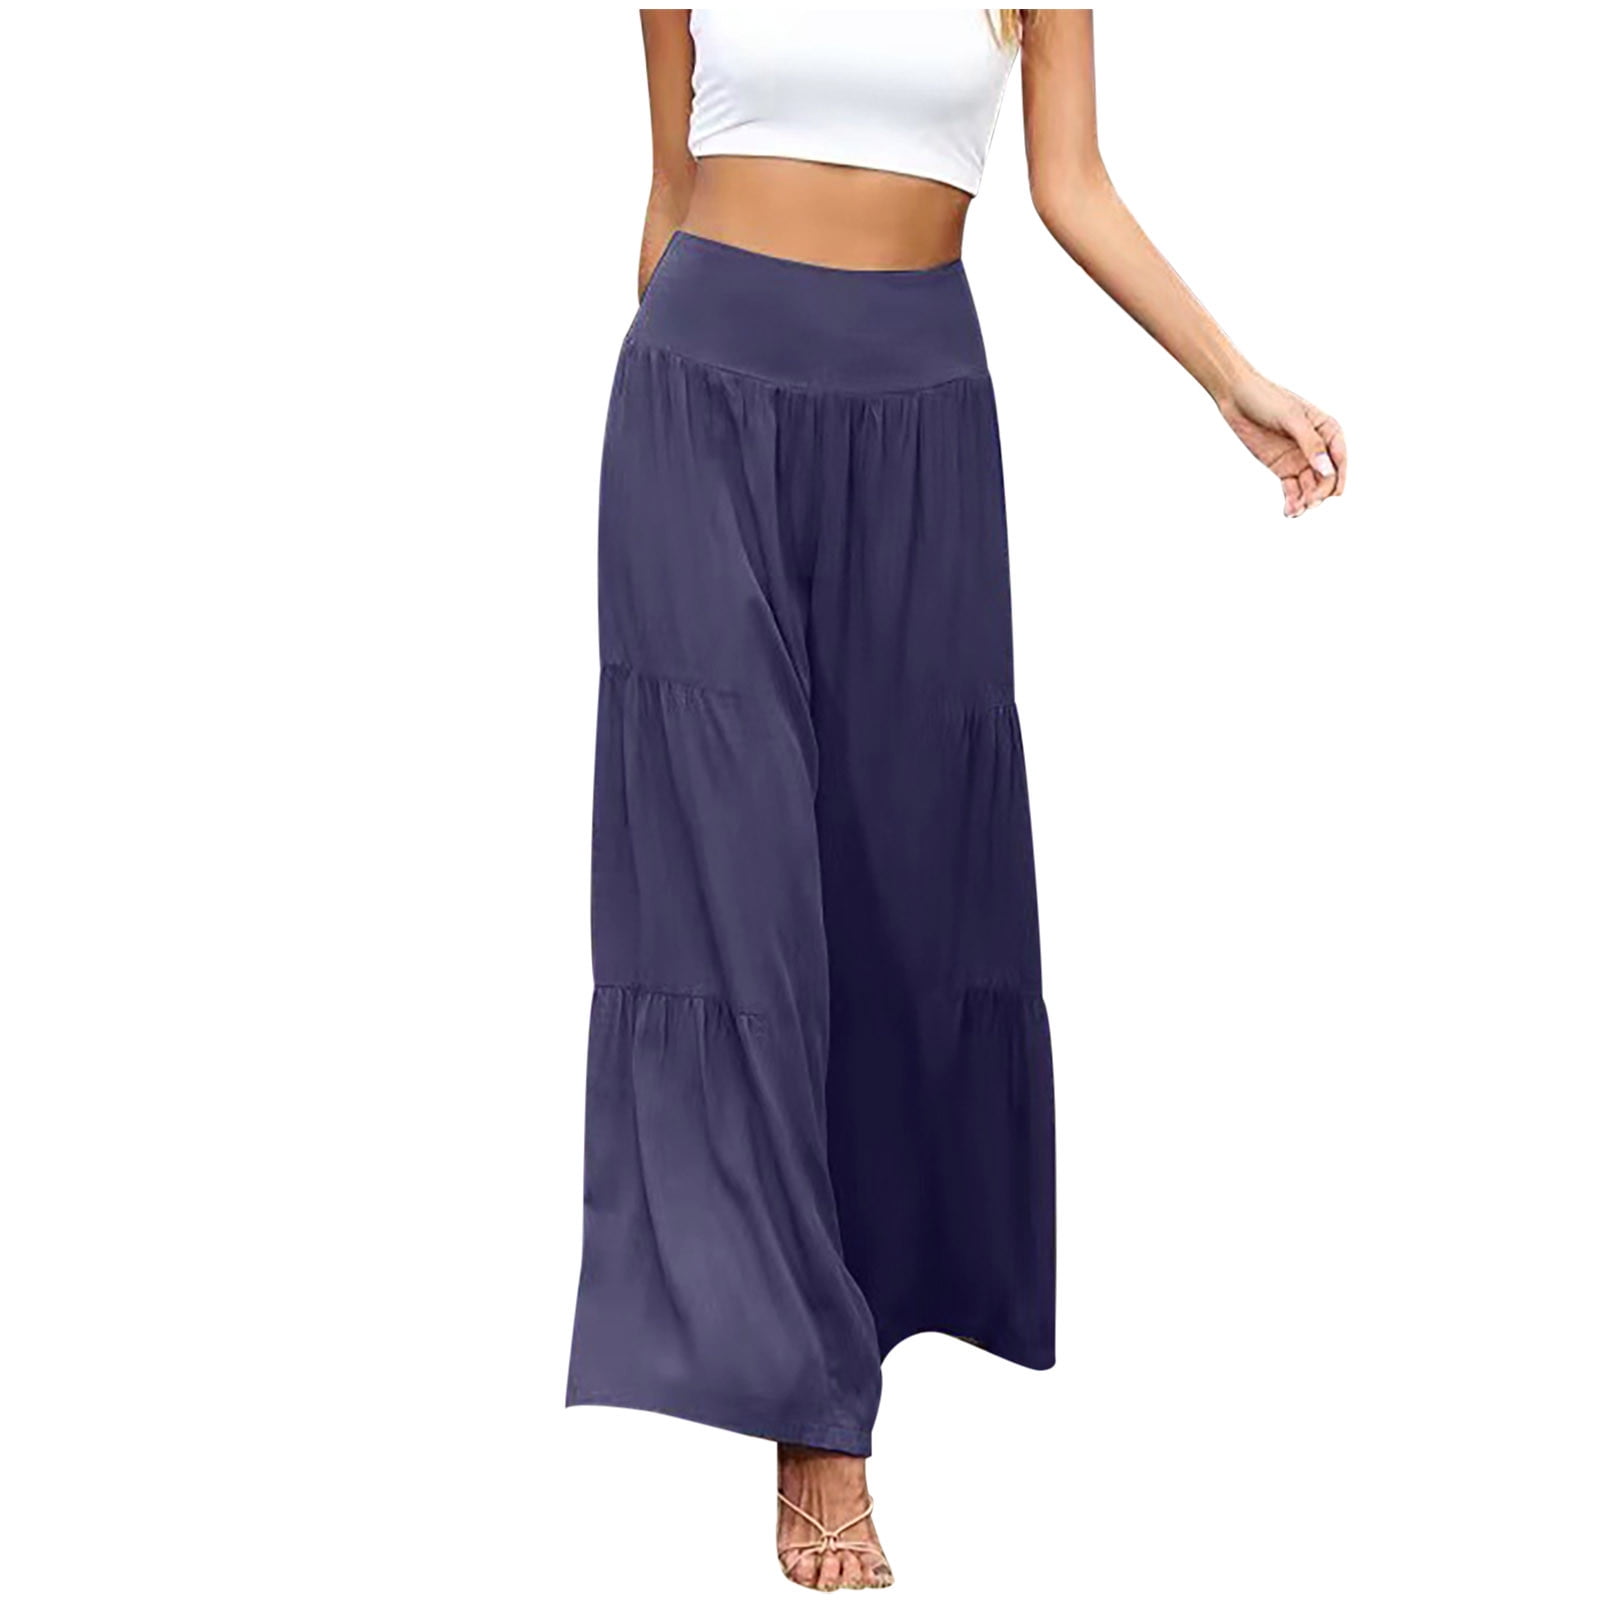 FAIWAD High Waisted Elastic Wide Leg Trousers for Women Drawstring Straight  Ruched Trouser Ladies Elegant Pants (Medium, Navy) 